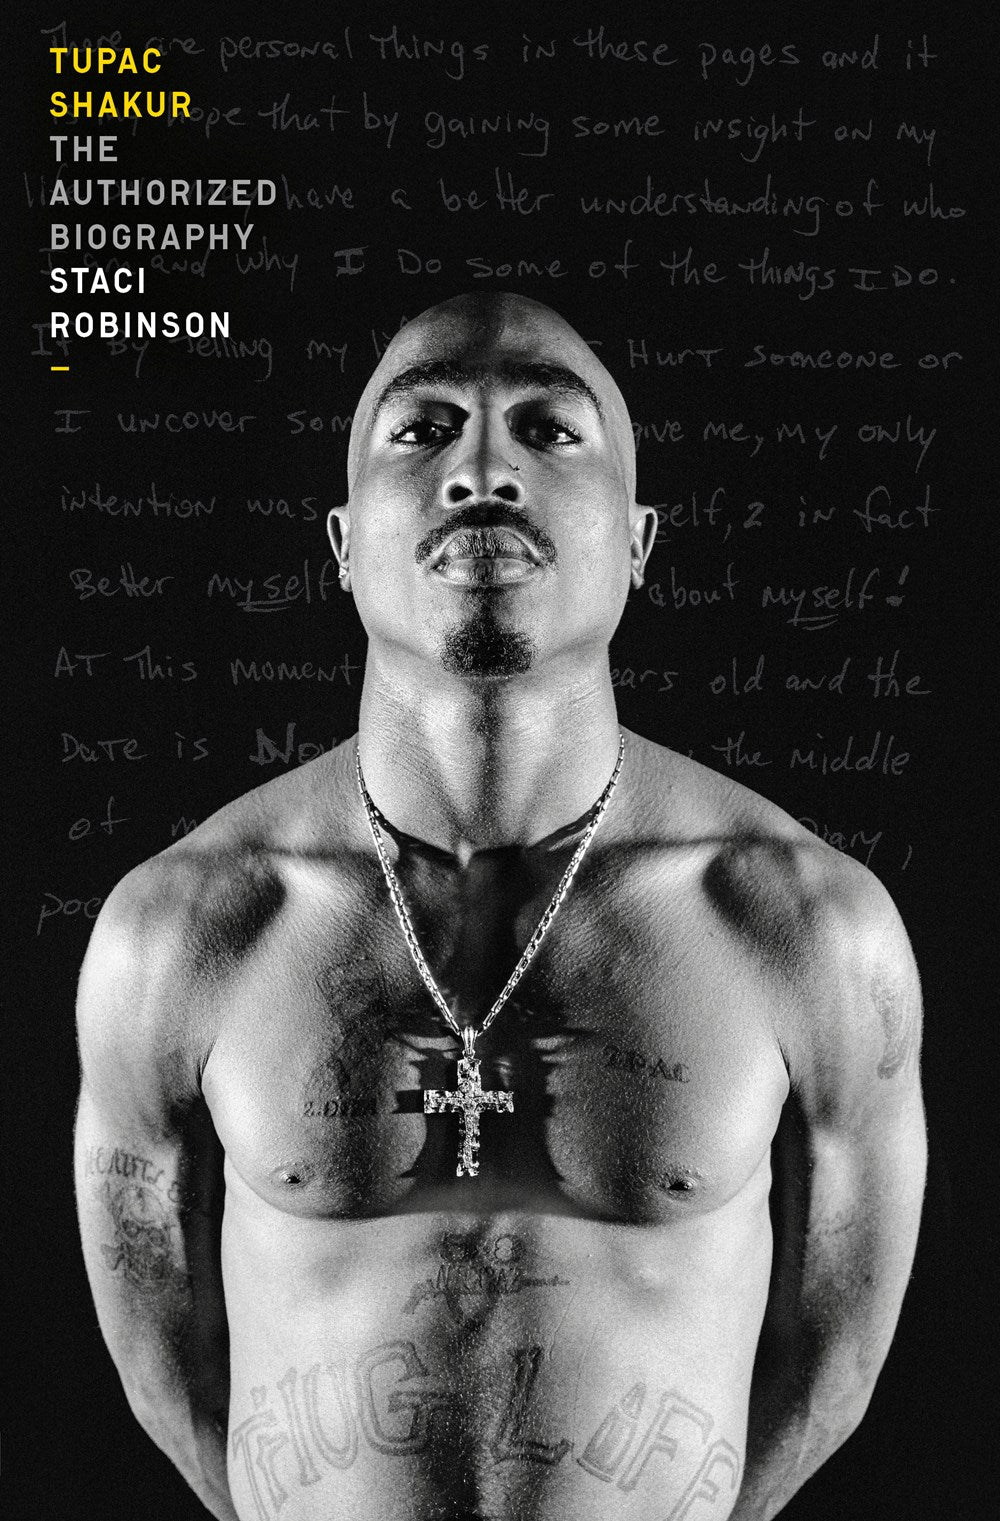 Tupac Shakur: The Authorized Biography by Staci Robinson (Hardcover)